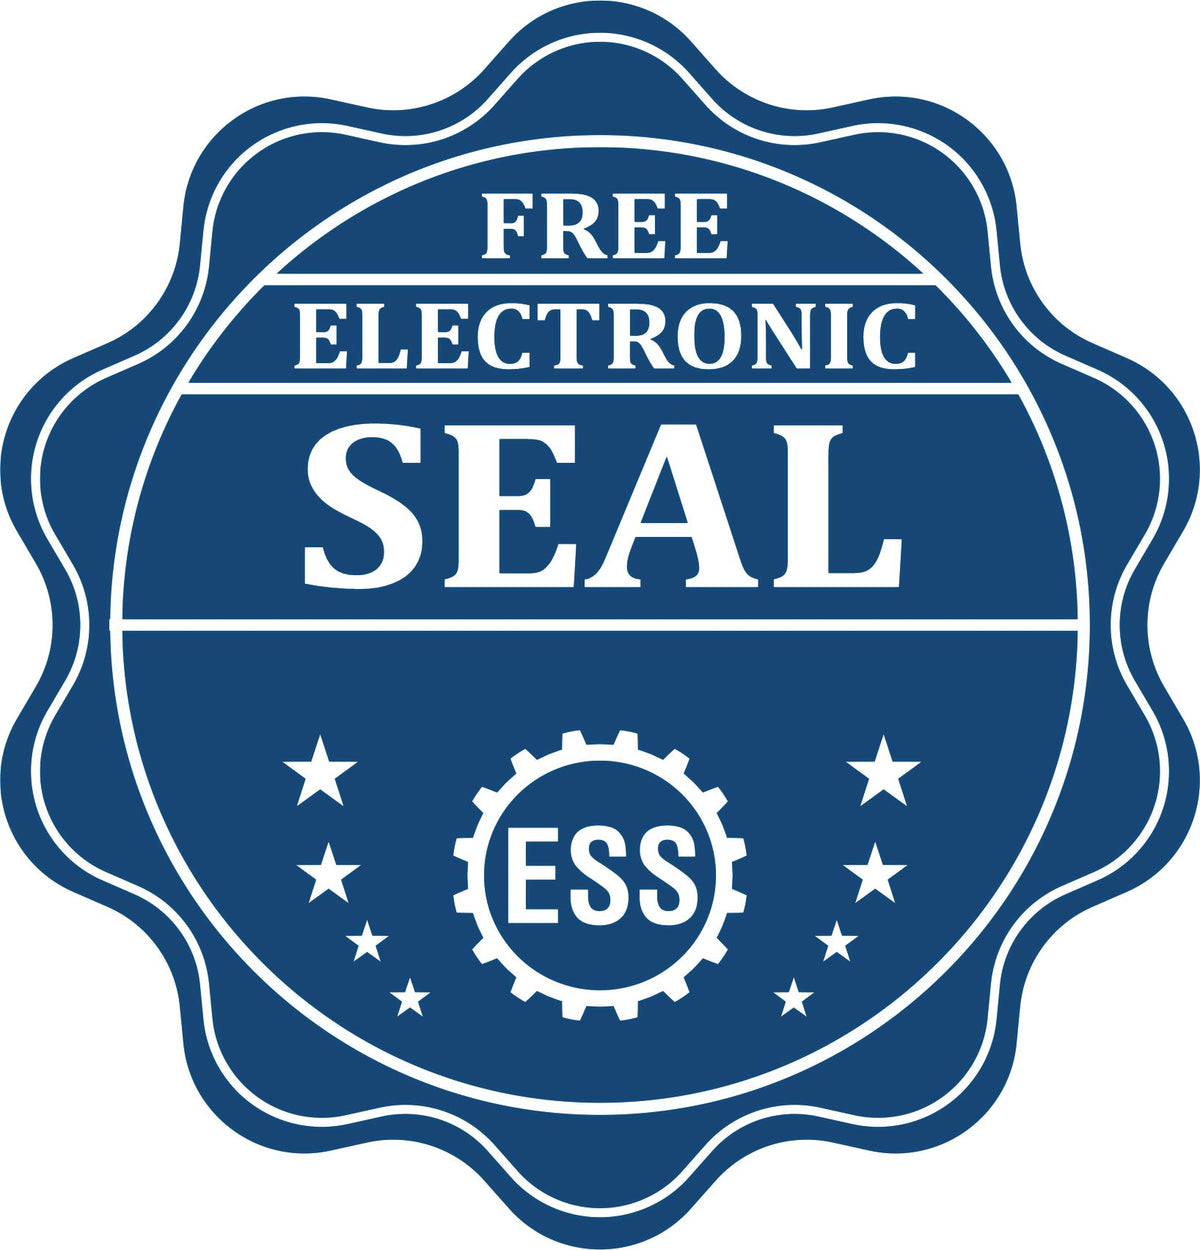 A badge showing a free electronic seal for the Hybrid Louisiana Land Surveyor Seal with stars and the ESS gear on the emblem.